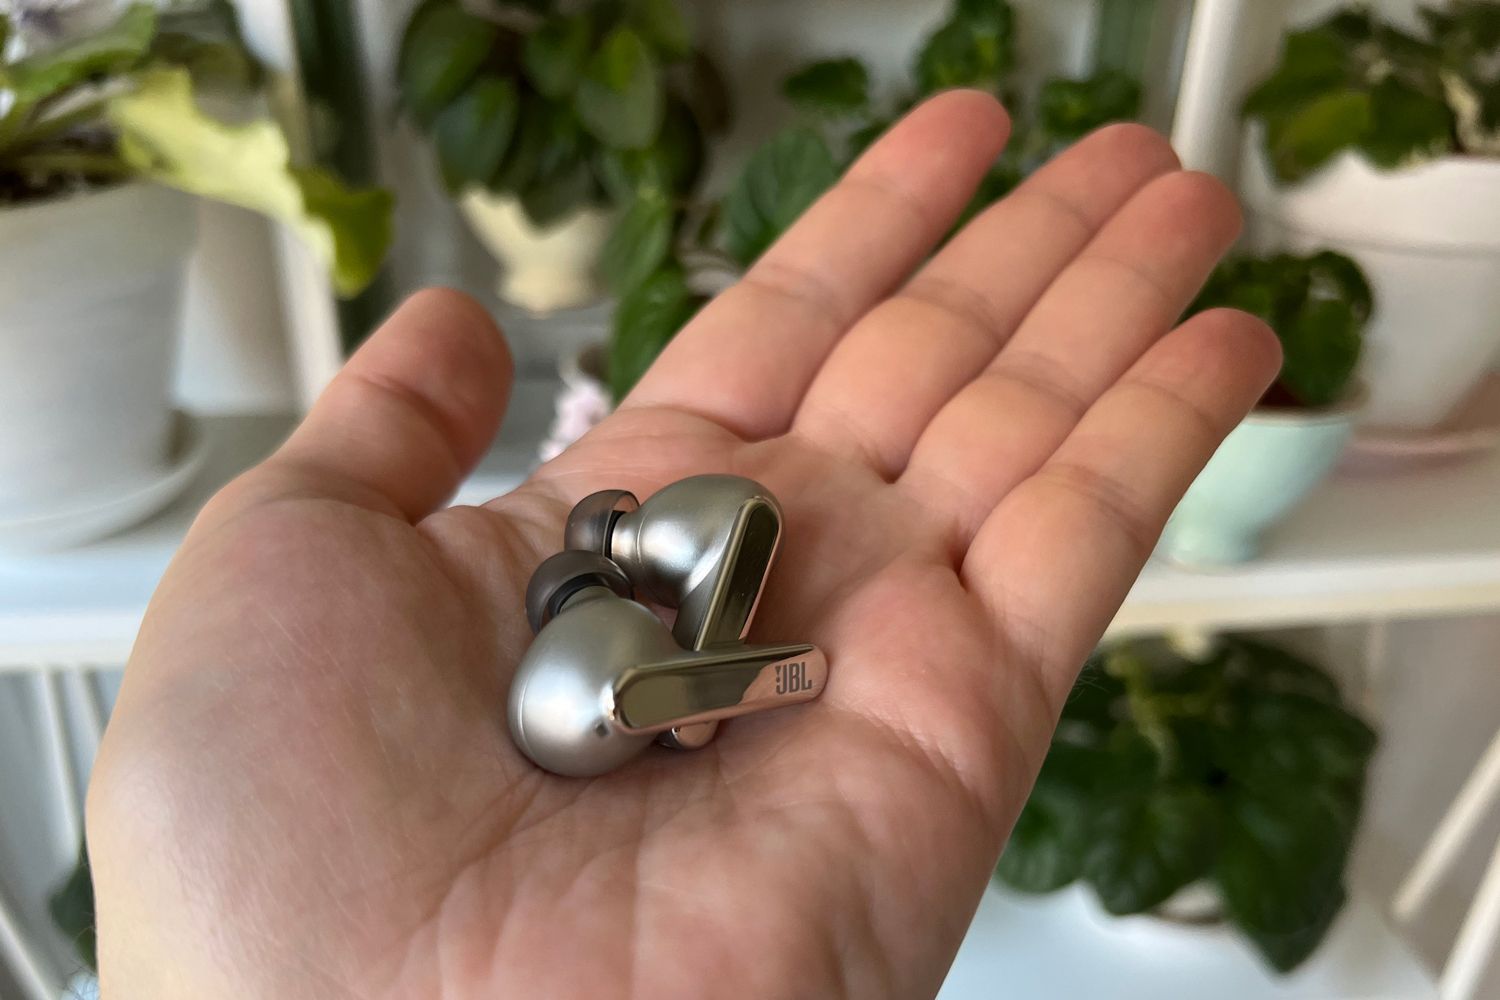 JBL Live Pro 2 Earbuds Review: The Best AirPods and AirPods Pro